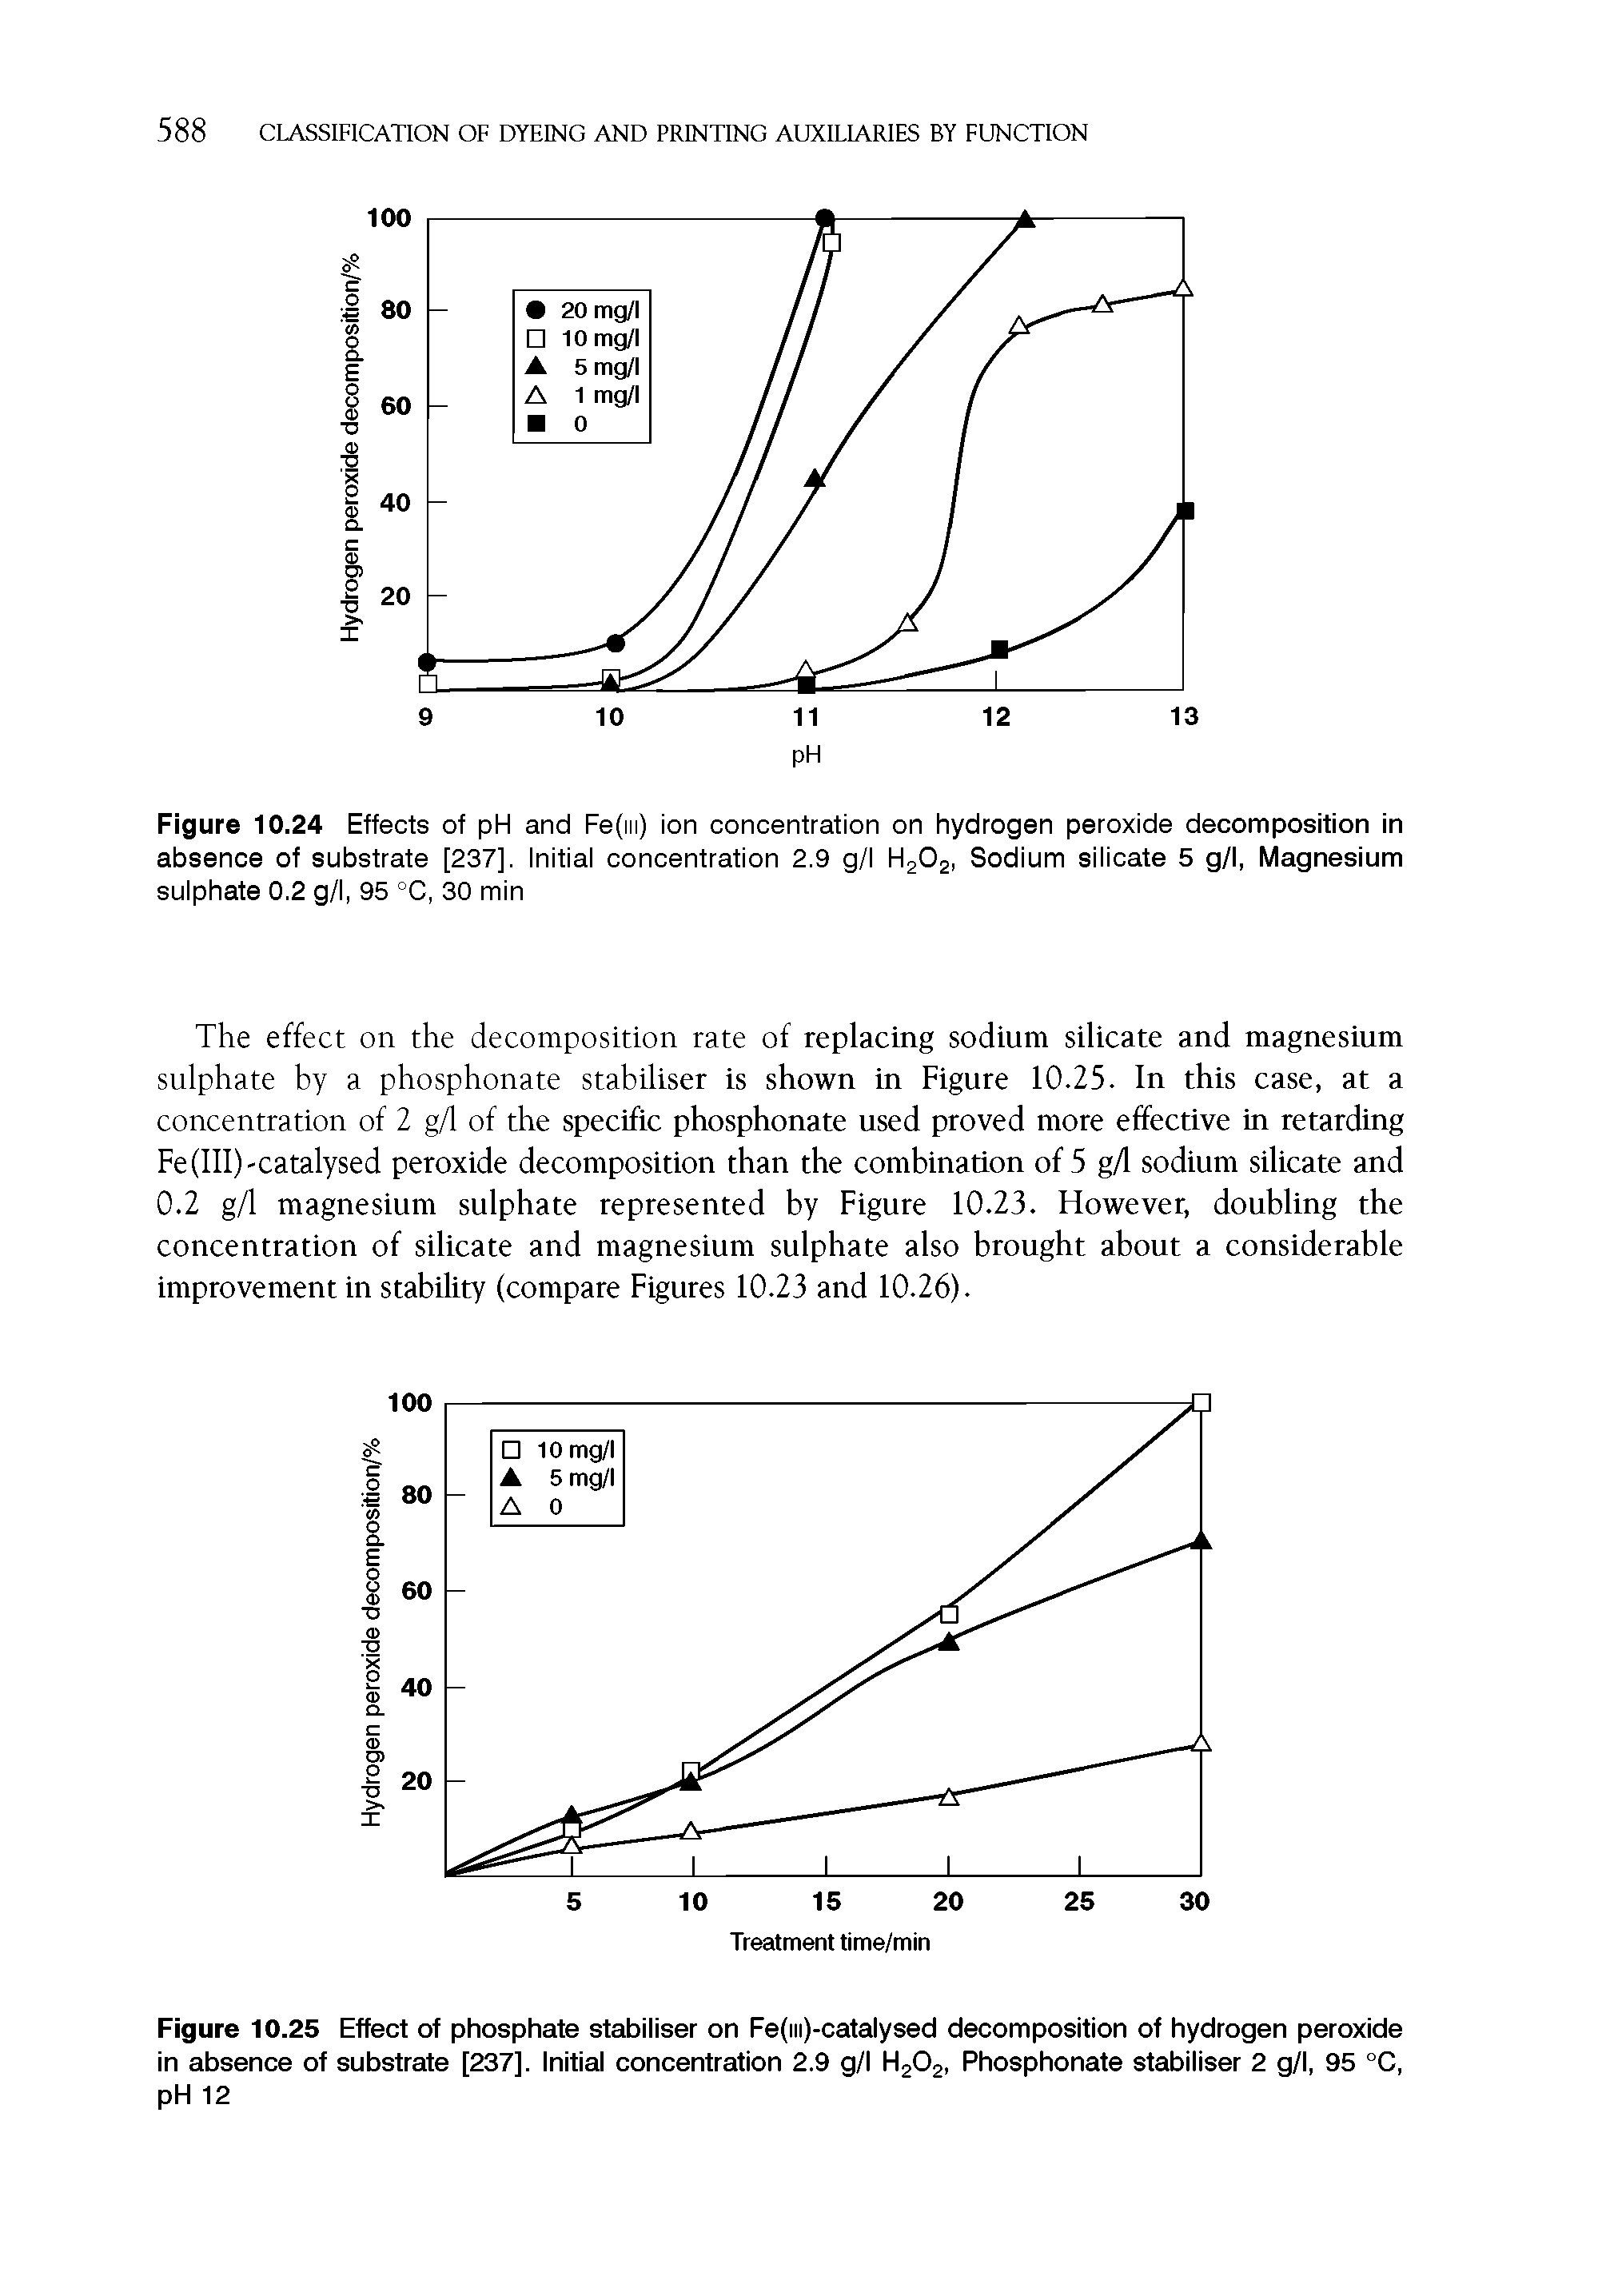 Figure 10.25 Effect of phosphate stabiliser on Fe(m)-catalysed decomposition of hydrogen peroxide in absence of substrate [237]. Initial concentration 2.9 g/l H202, Phosphonate stabiliser 2 g/l, 95 °C, pH 12...